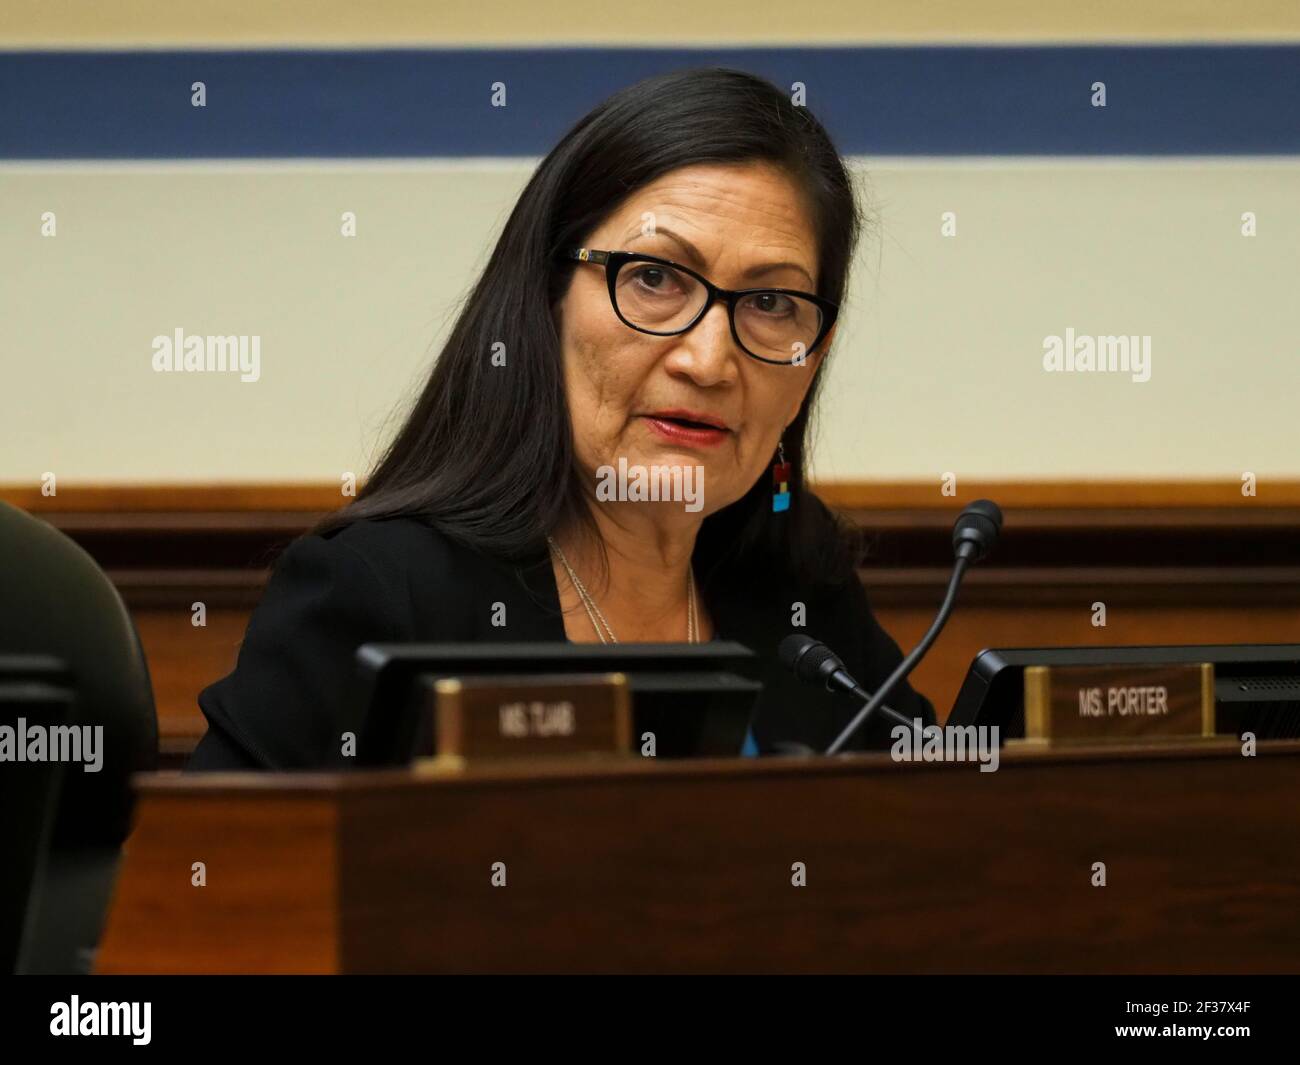 Washington, District of Columbia, USA. 26th Feb, 2020. Rep. DEB HAALAND (NM-01) attends a Congressional hearing during Black History Month on the civil rights movement and protecting the right to vote. Credit: Sue Dorfman/ZUMA Wire/Alamy Live News Stock Photo